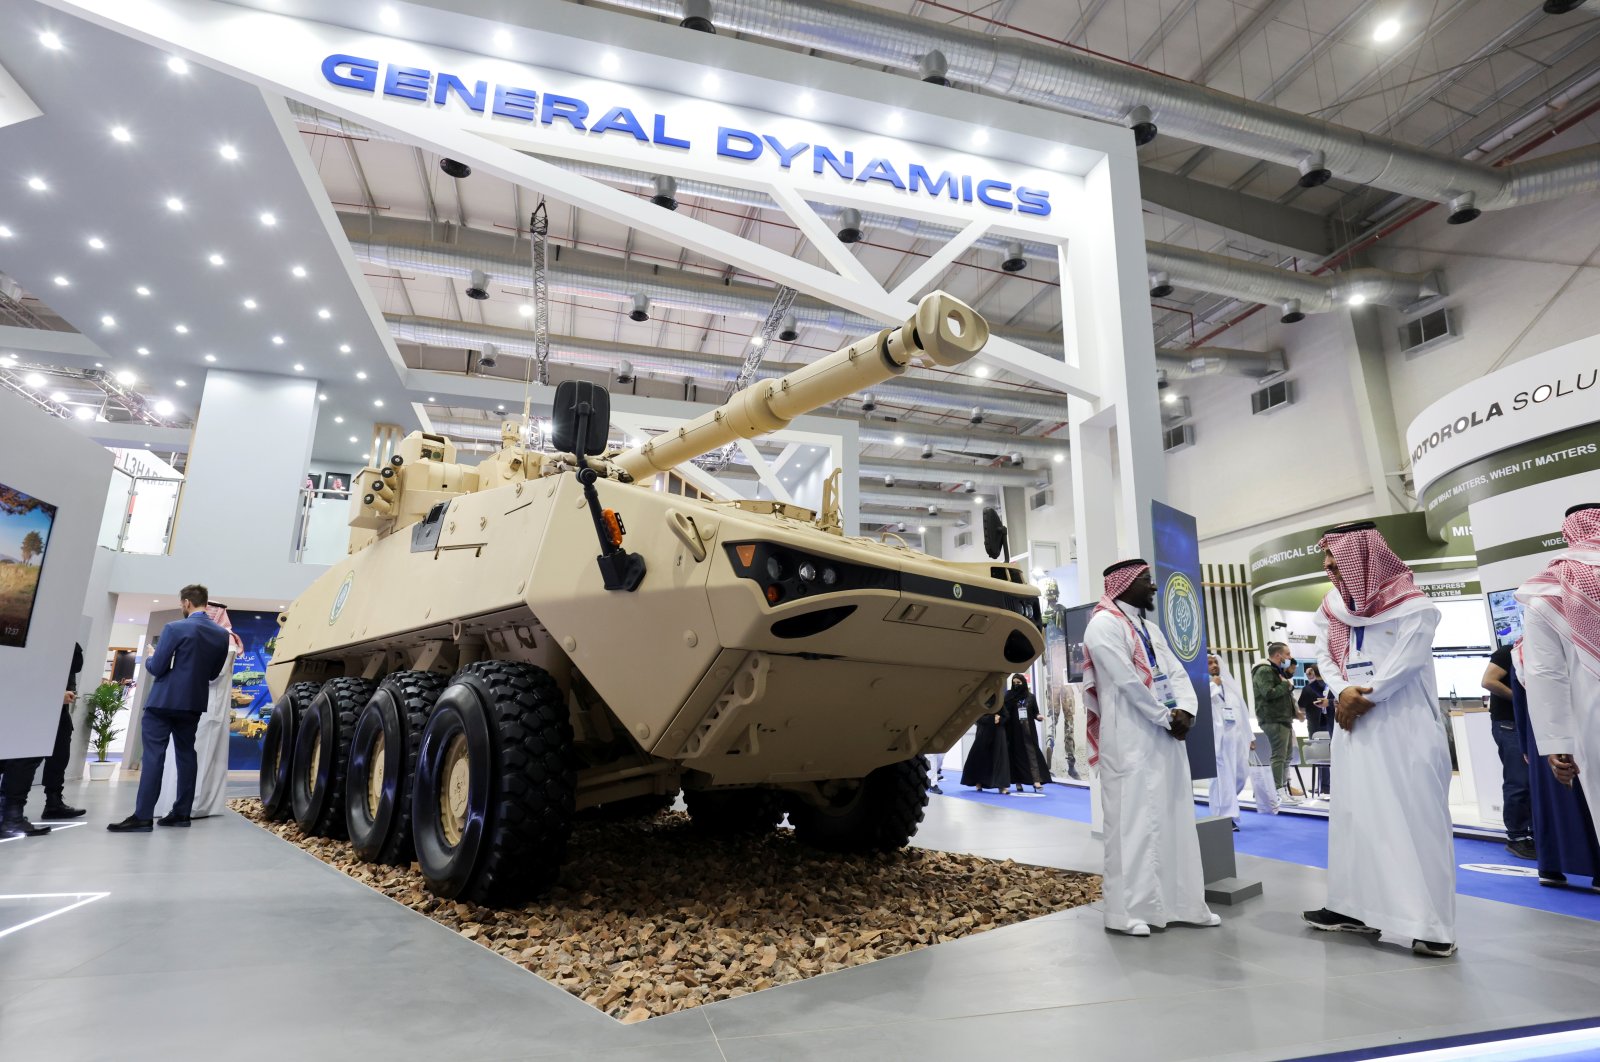 People are seen at General Dynamics stand displaying the latest defense system at the World Defense Show in Riyadh, Saudi Arabia, March 6, 2022. (Reuters Photo)